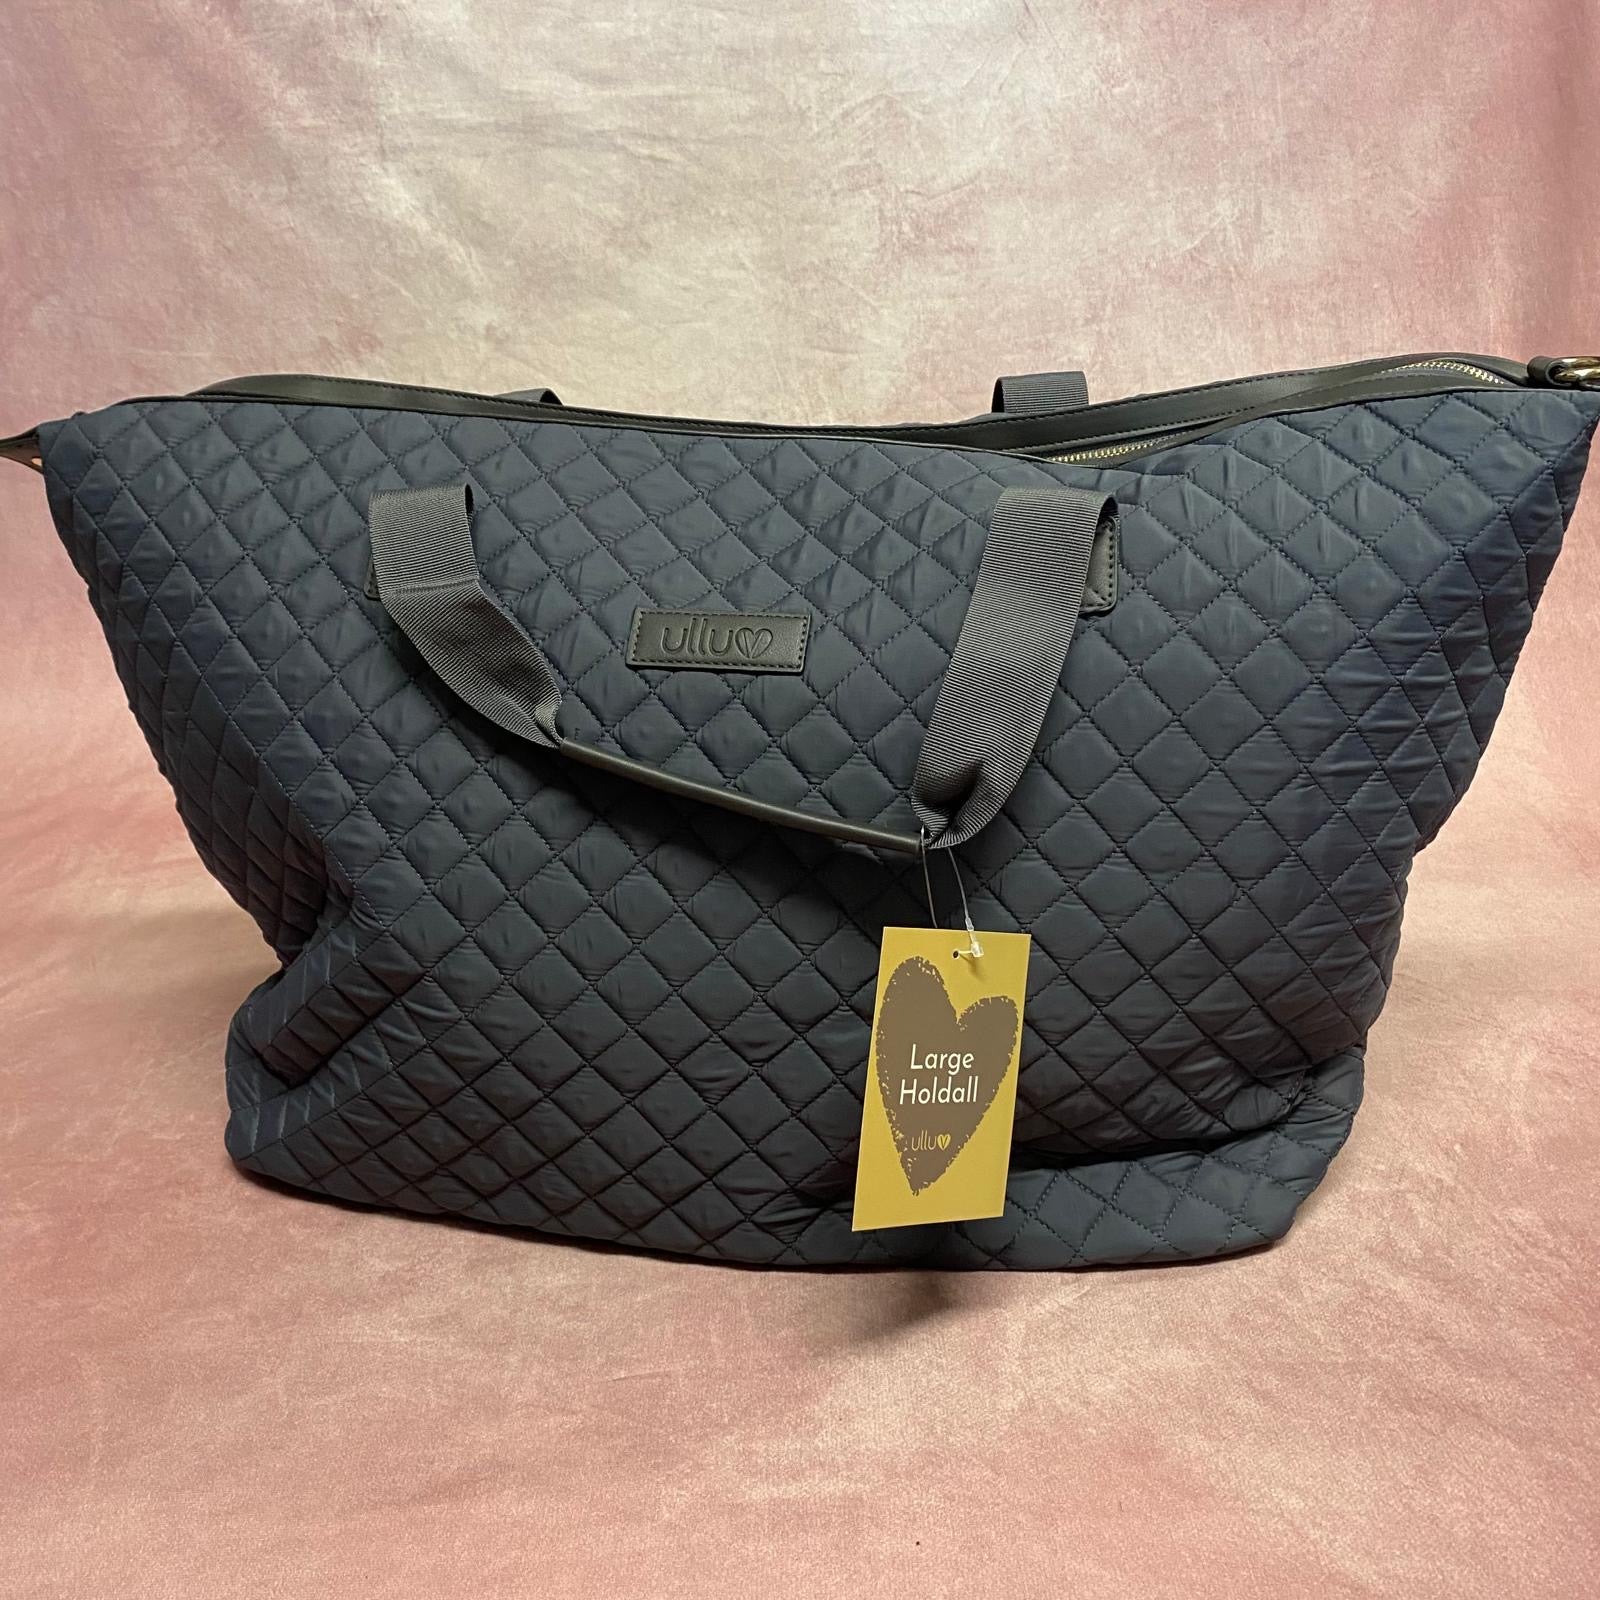 CLEARANCE - Signature Large Holdall in Dark Grey